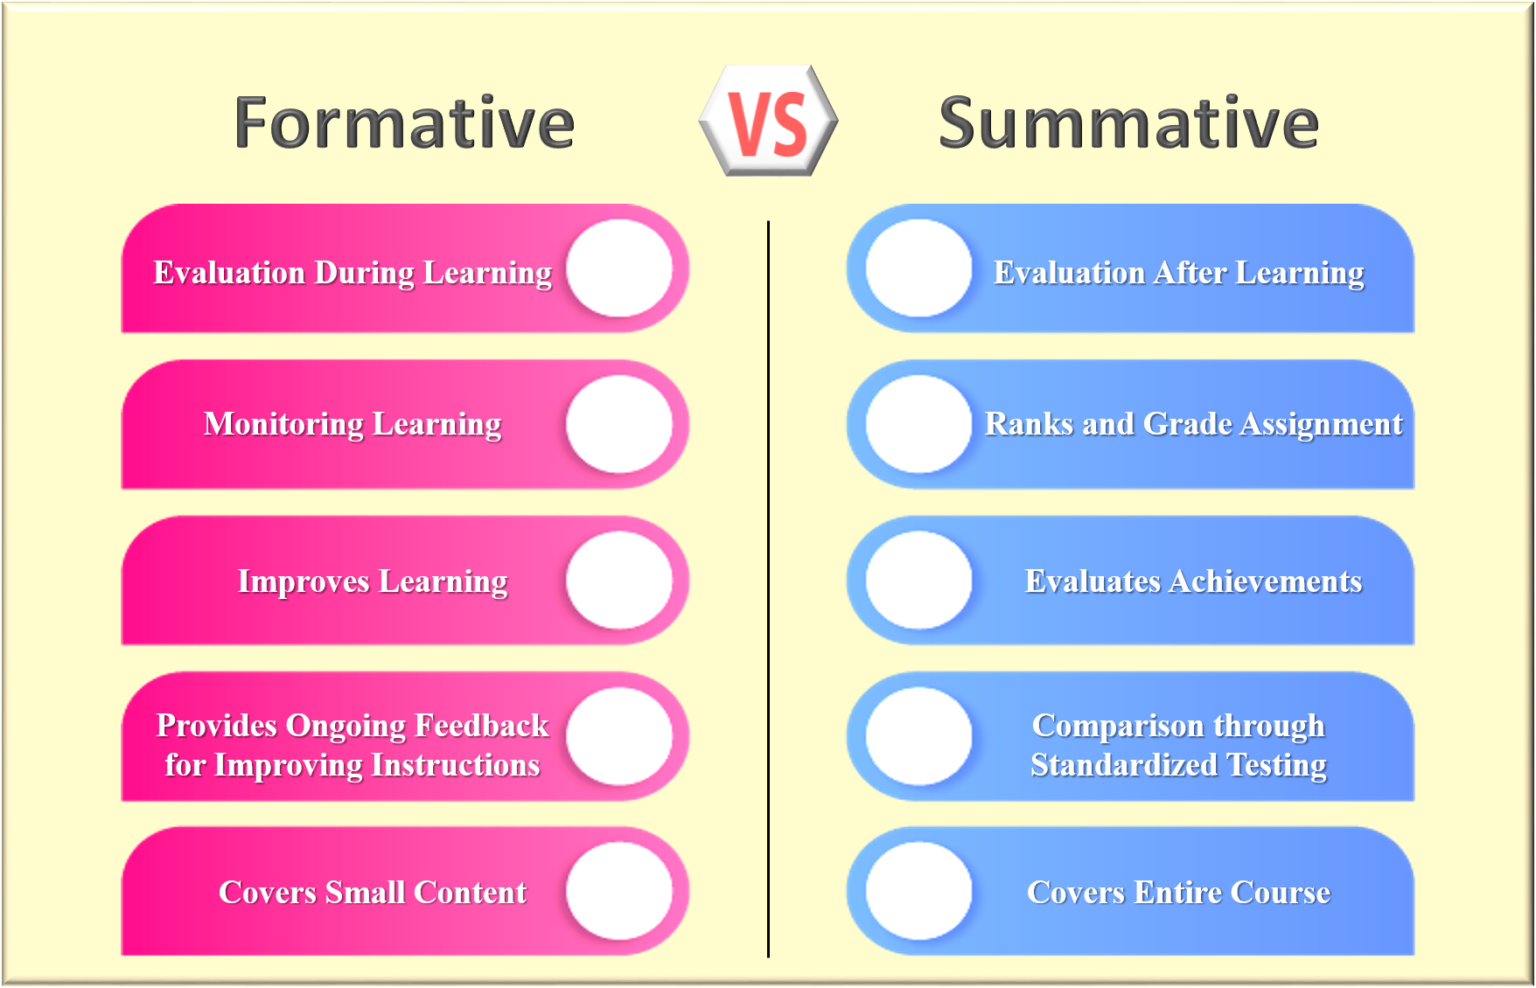 summative and formative assessment in education